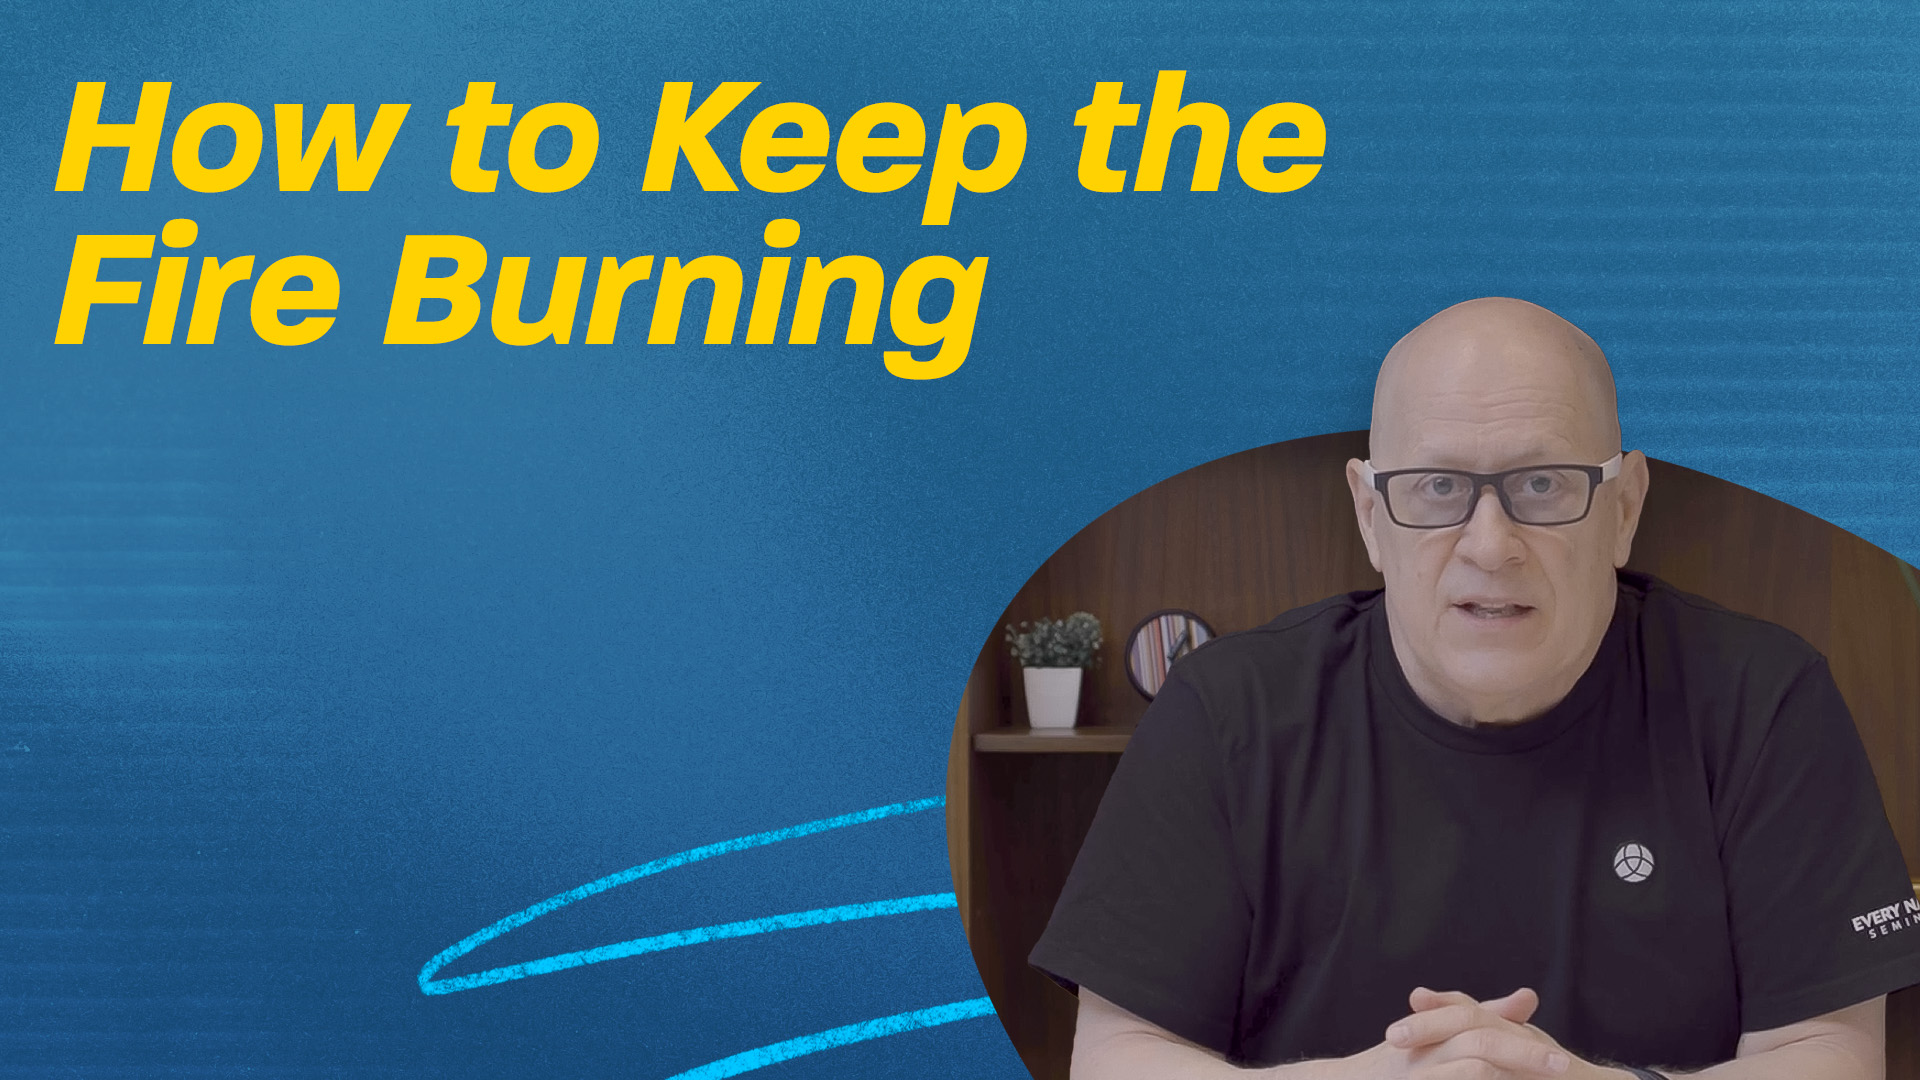 How to Keep the Fire Burning